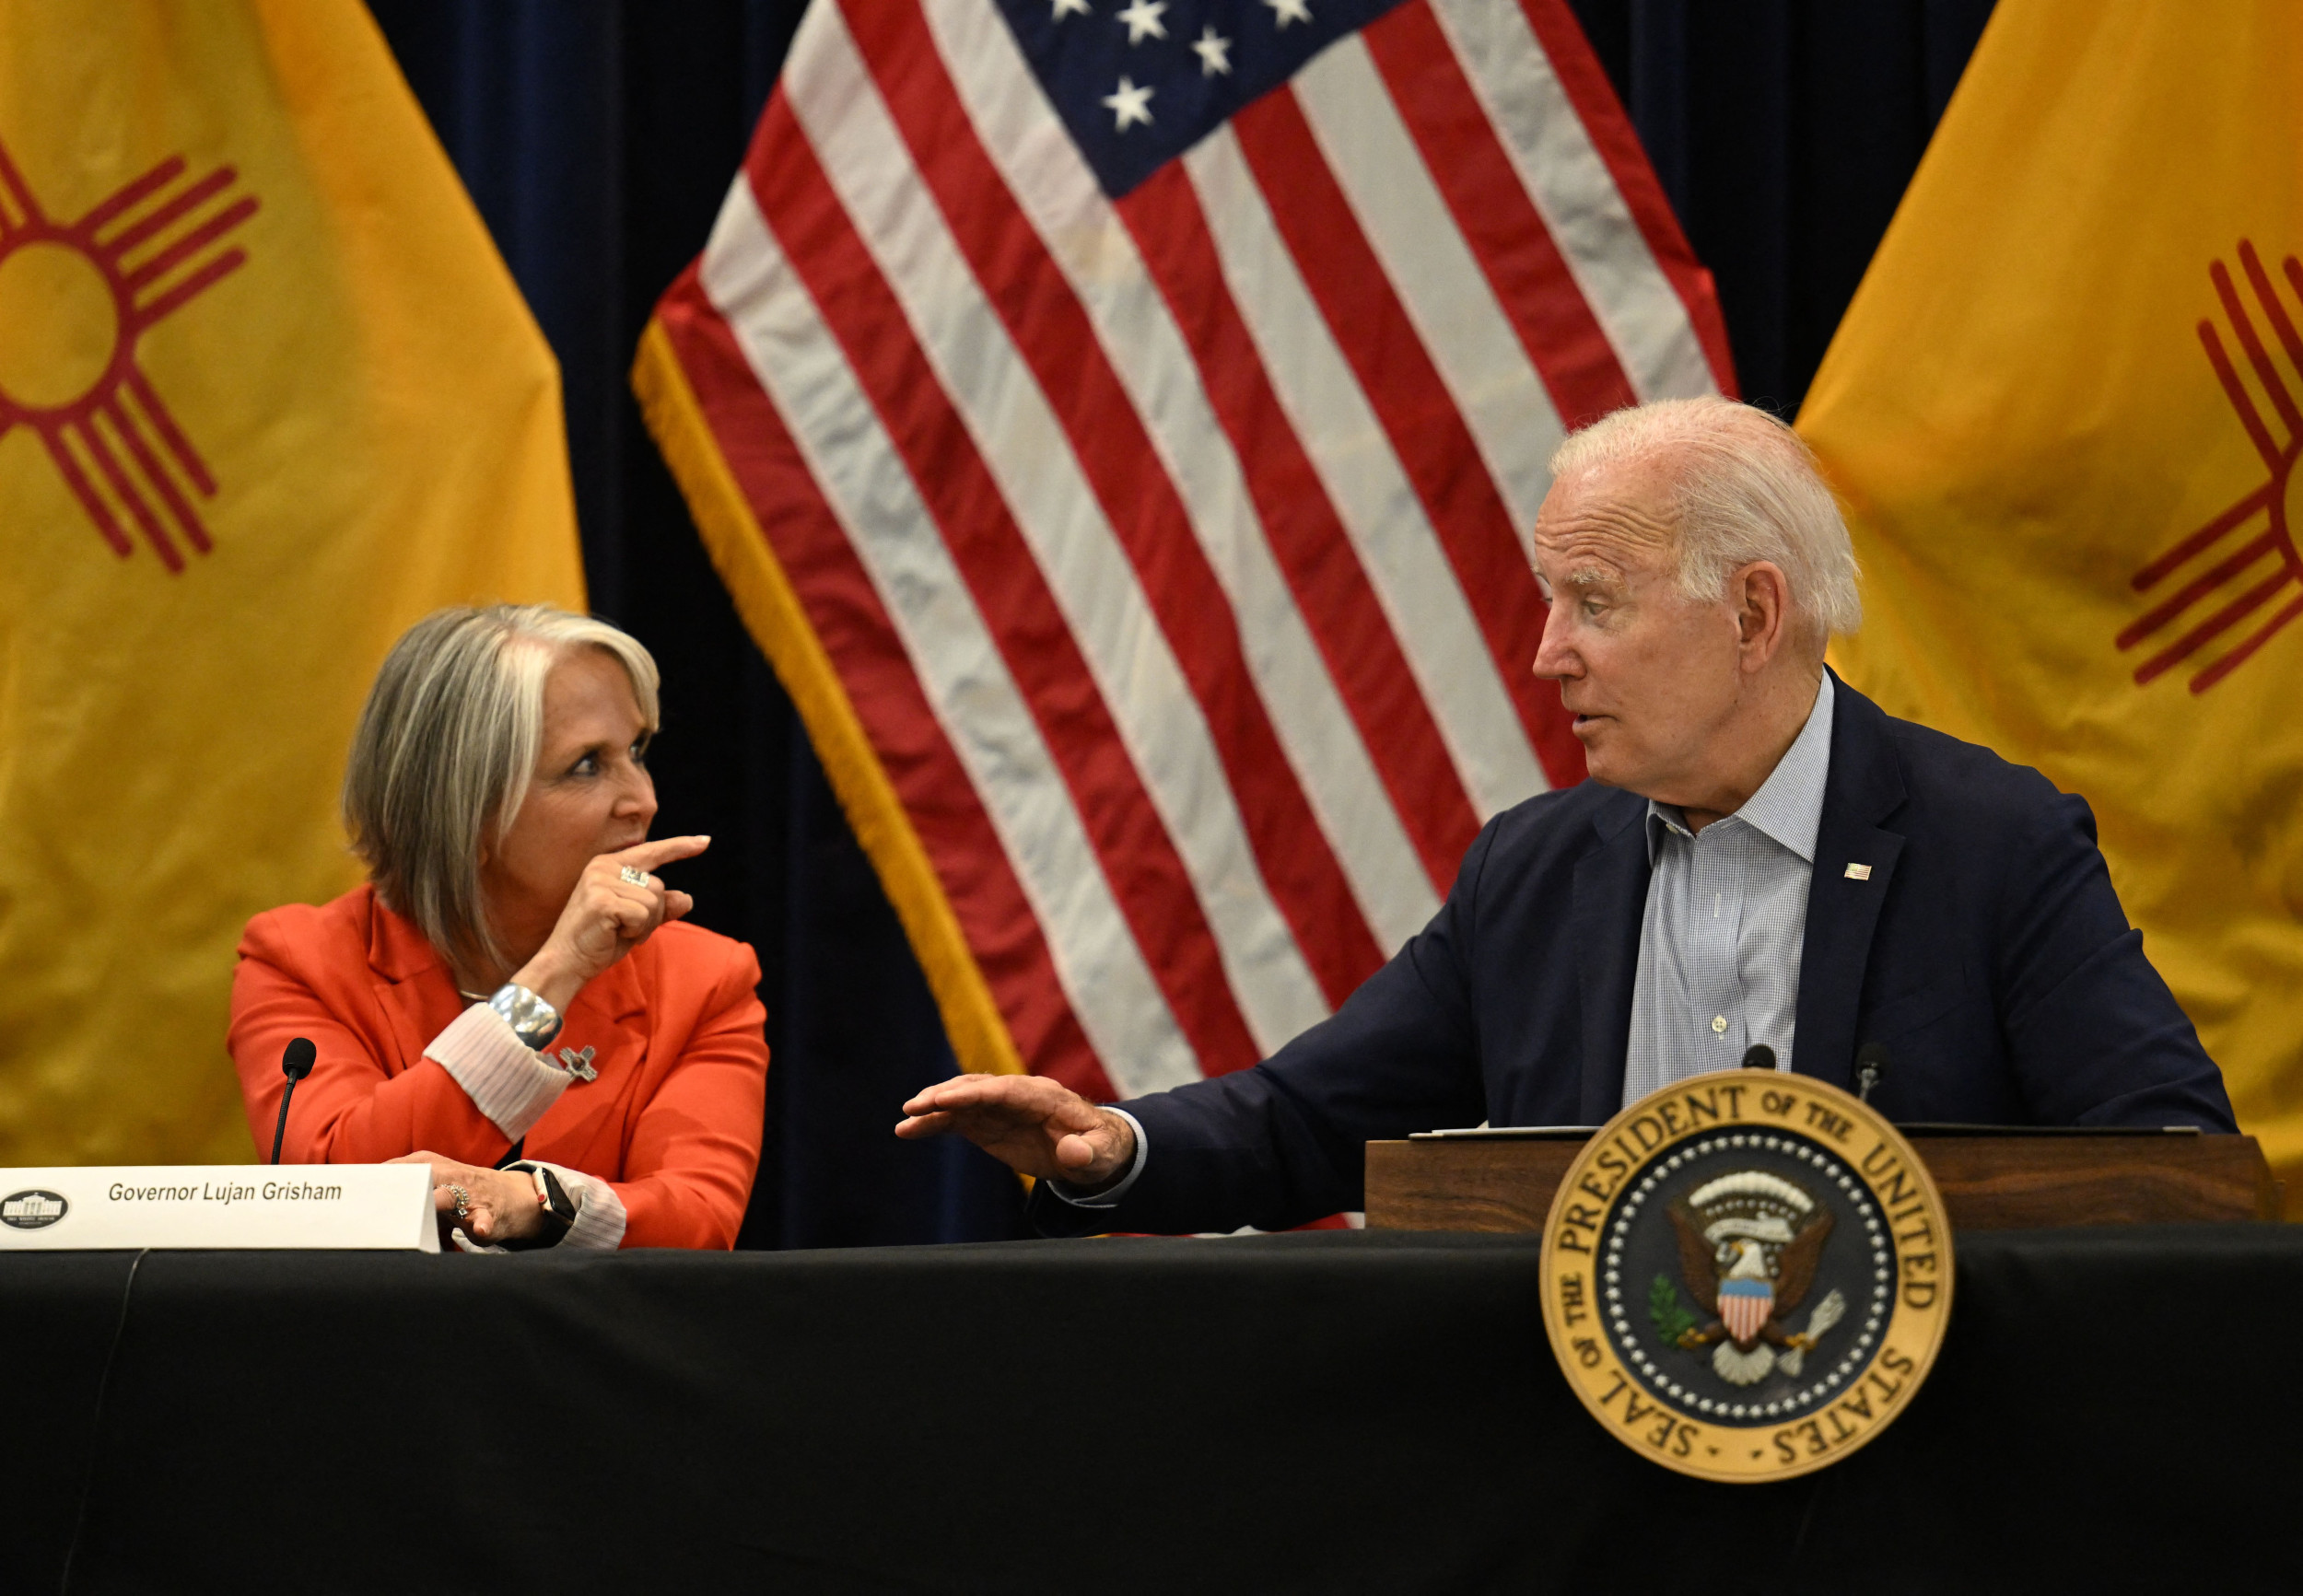 democratic governor suggests biden admin 'persecuting' her state